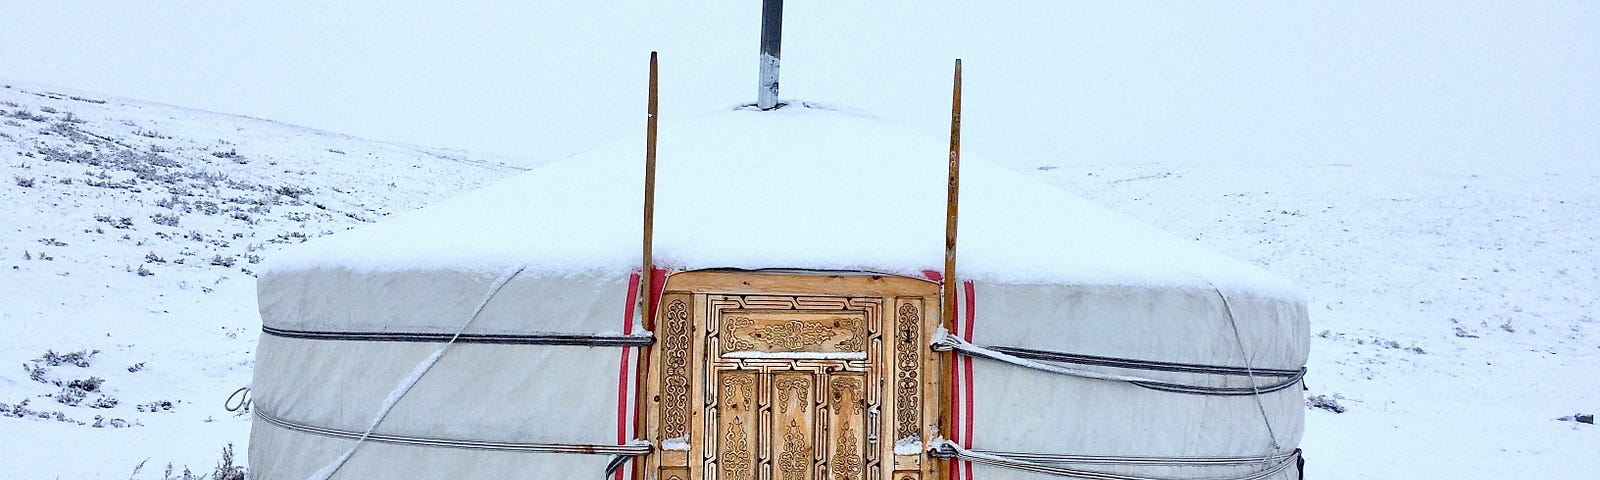 A snowy white yurt with a wooden door.